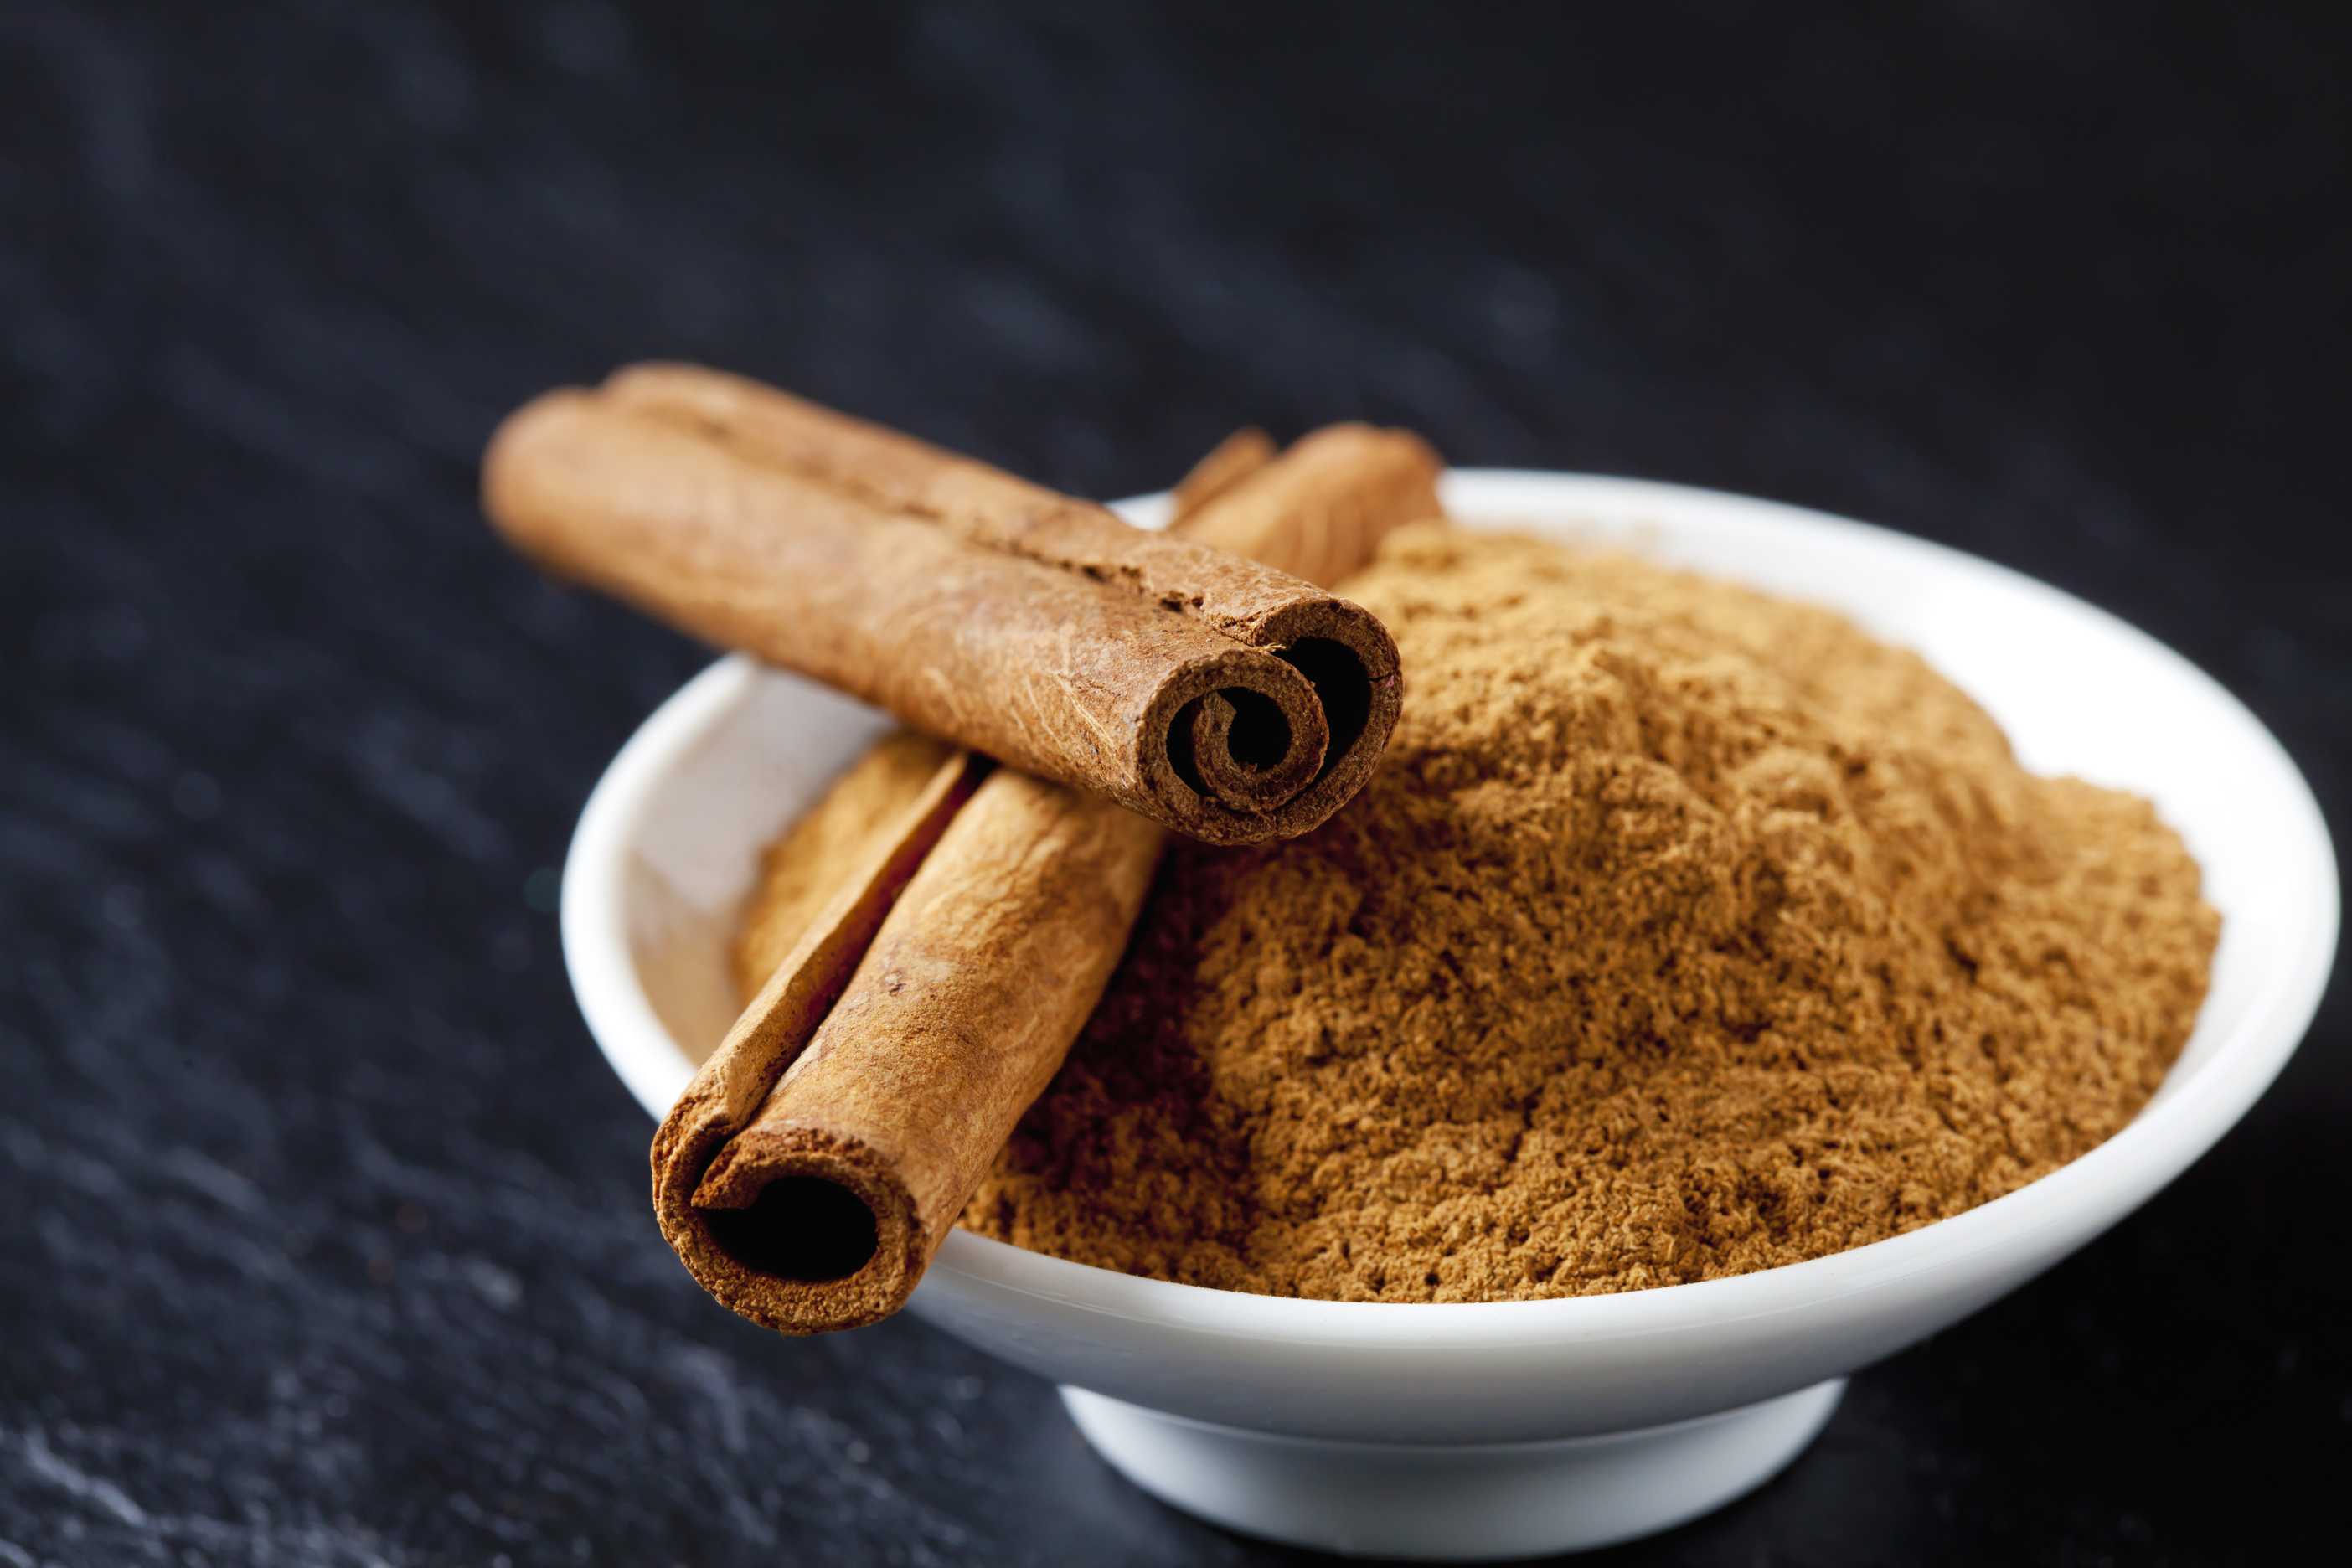 microsoft, does cinnamon help decrease blood sugar levels? a review by nutrition professionals